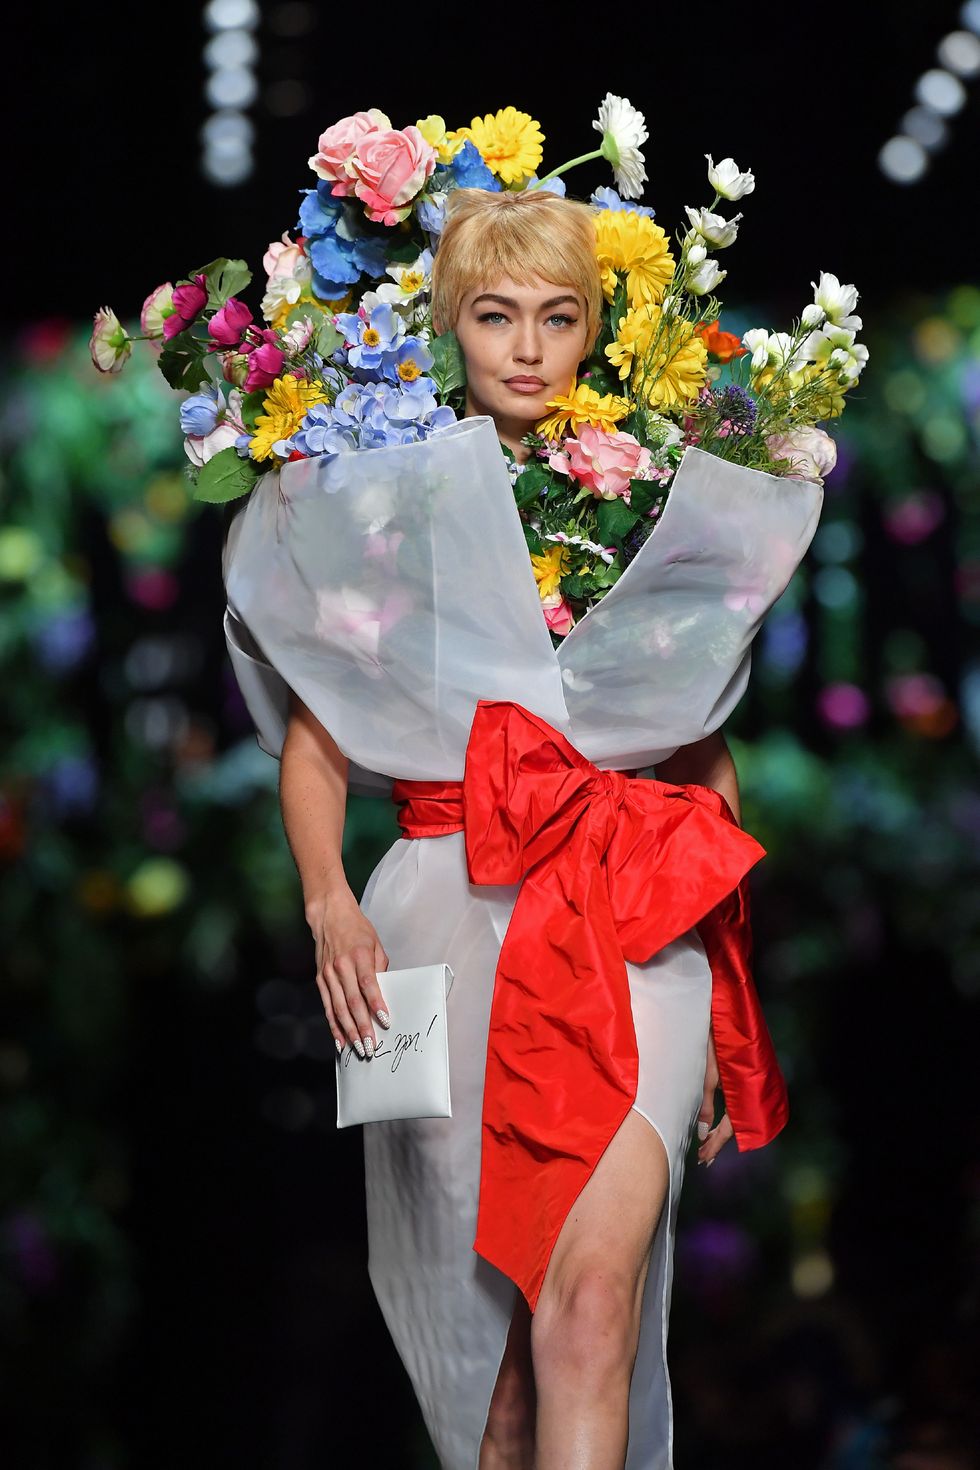 Model Gigi Hadid presents a creation for fashion house Moschino during the Women's Spring/Summer 2018 fashion shows in Milan, on September 21, 2017.  / AFP PHOTO / Marco BERTORELLO        (Photo credit should read MARCO BERTORELLO/AFP/Getty Images)